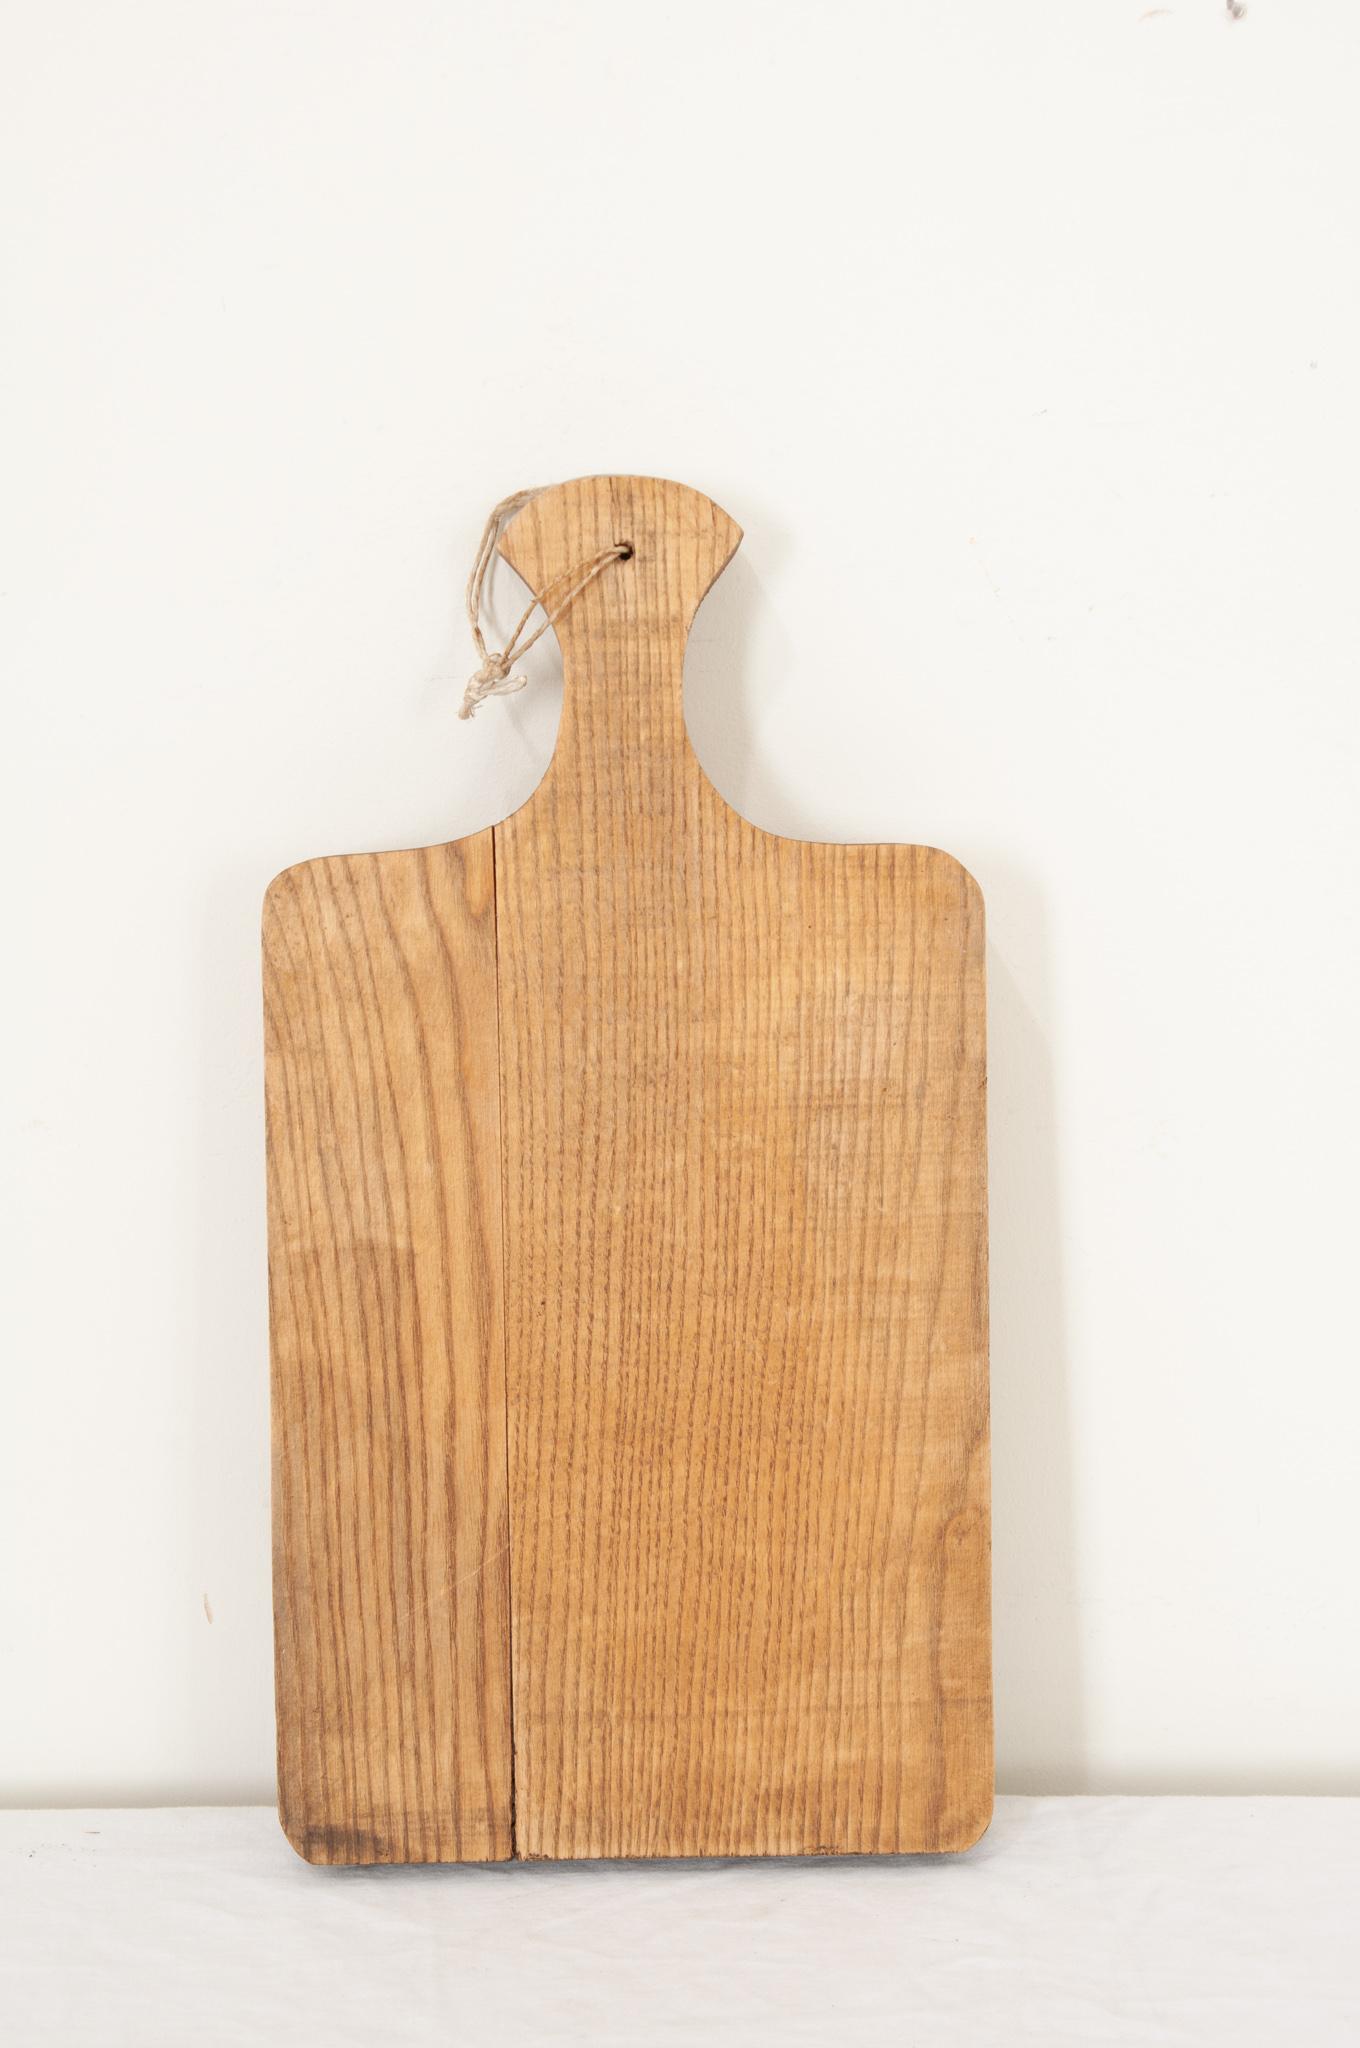 A large single plank wood cutting board from France in a paddle shape with smooth corners and a handle with option to hang on the wall. The wood has a nice patina and wonderful striations in the wood grain. Knife marks and scrapes that were left by